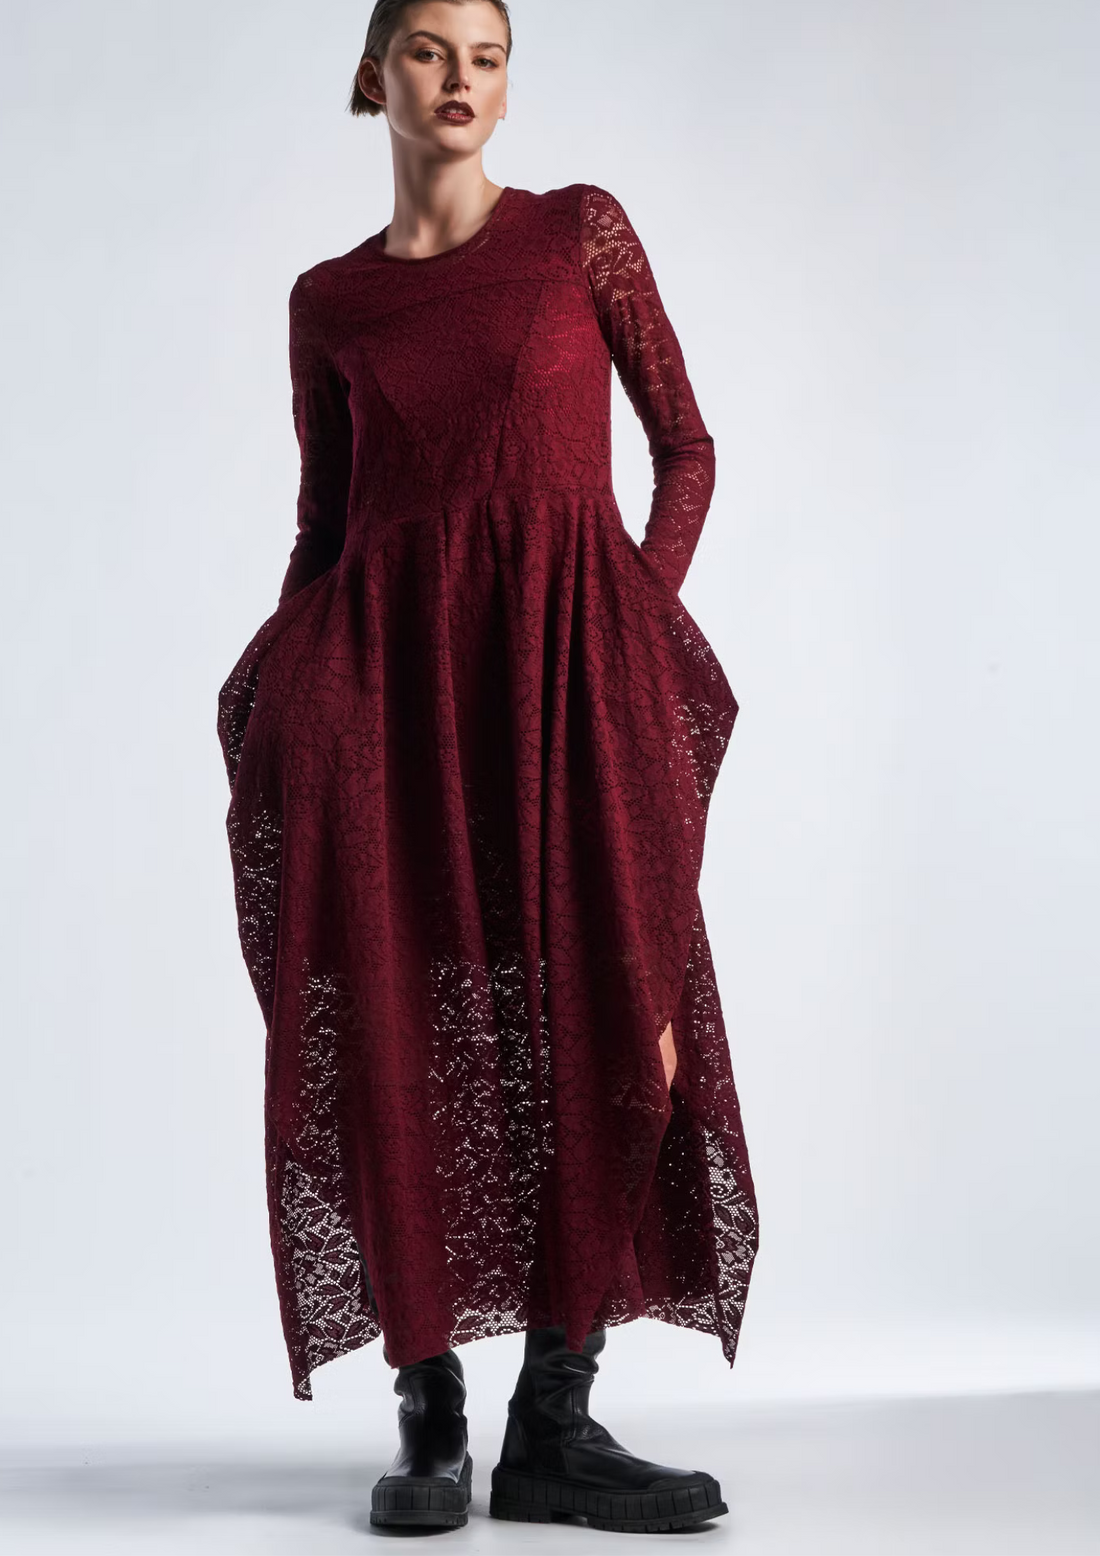 Formidable Wine Lace Dress